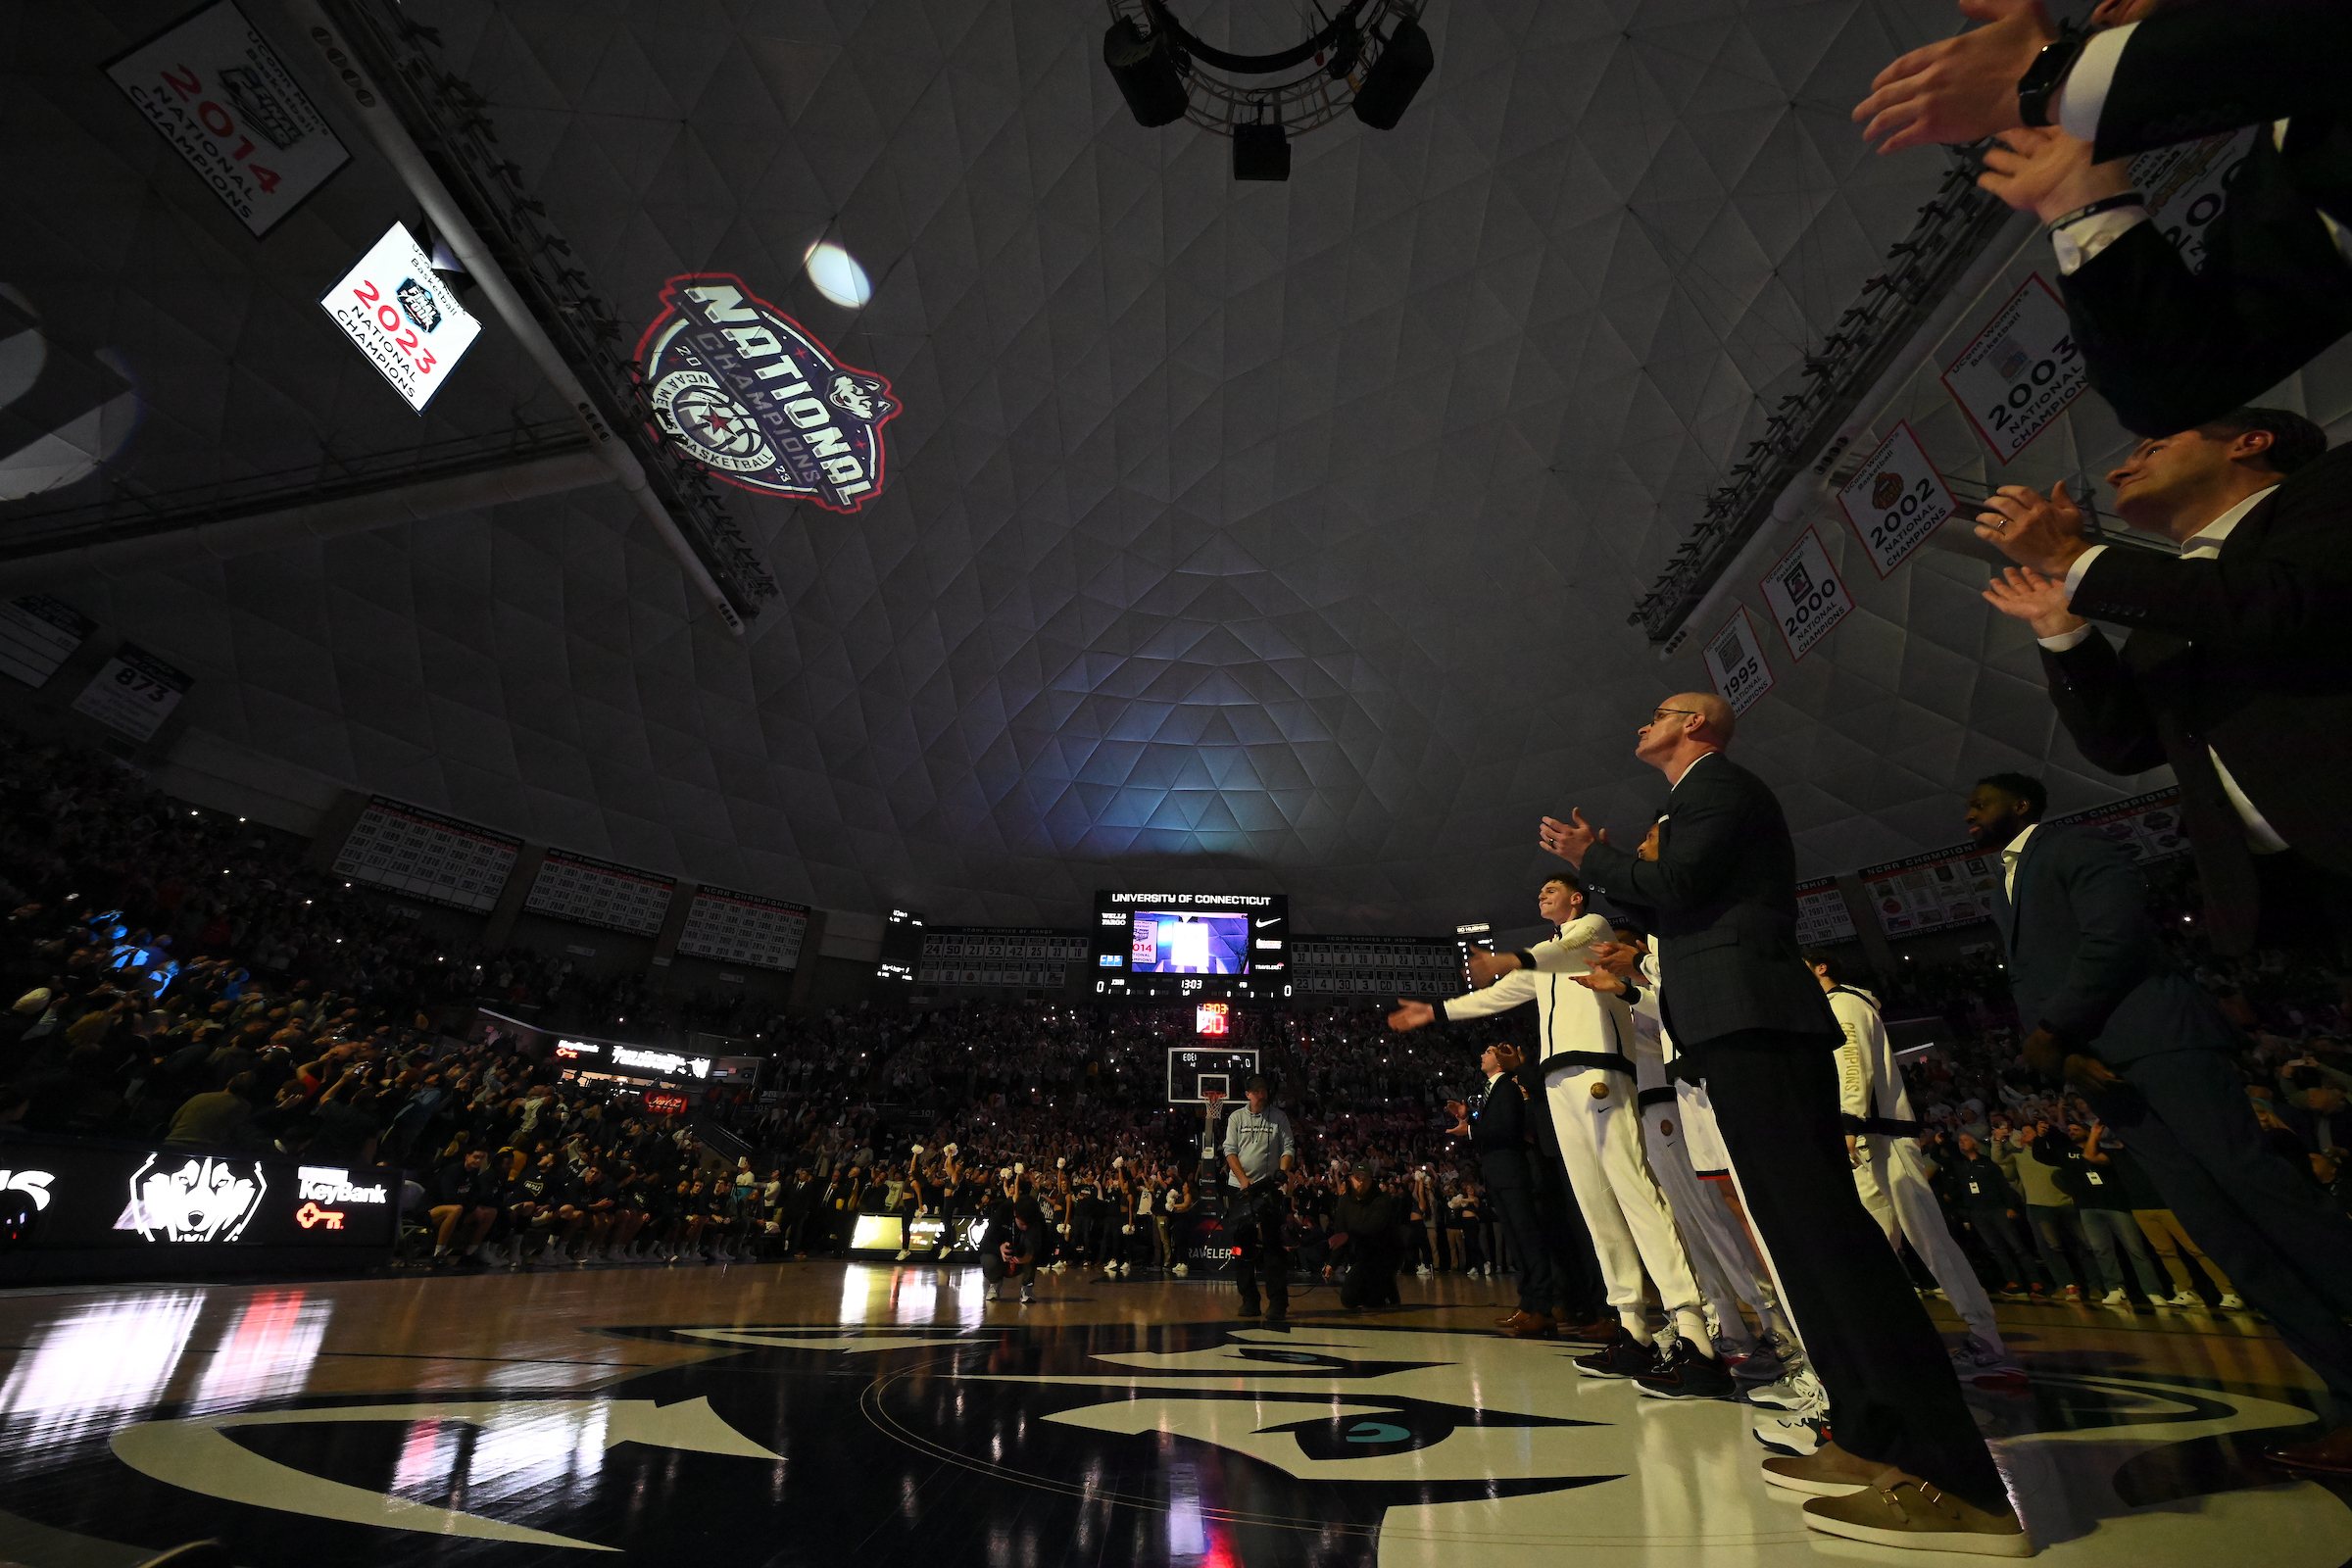 The 2023 NCAA championship banner was unveiled before a record crowd for the men's home opener at Gampel Pavilion.